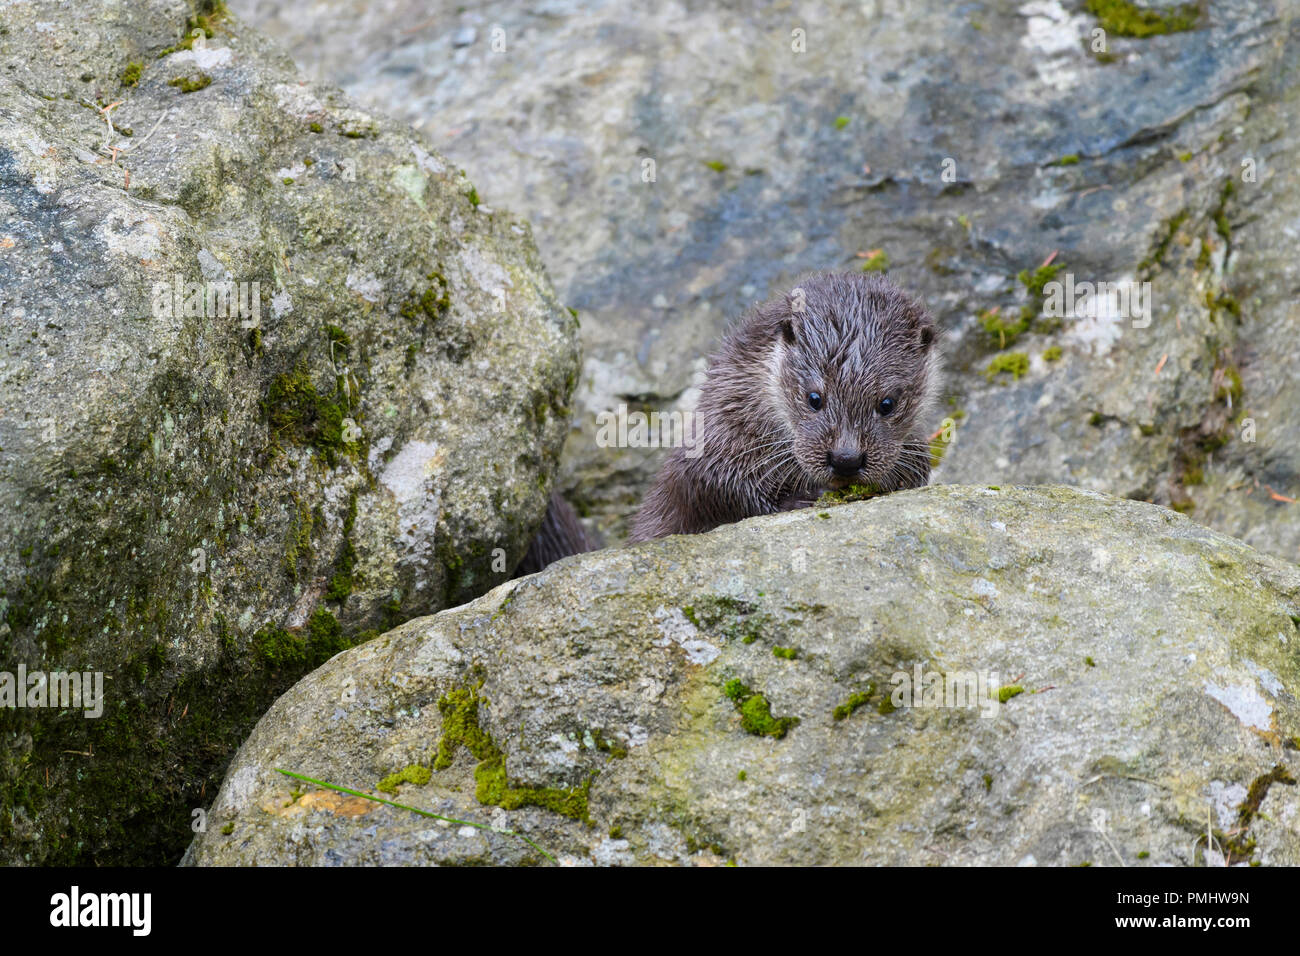 Otter, lutra lutra, Young otter, Bavaria, Germany, Europe Stock Photo